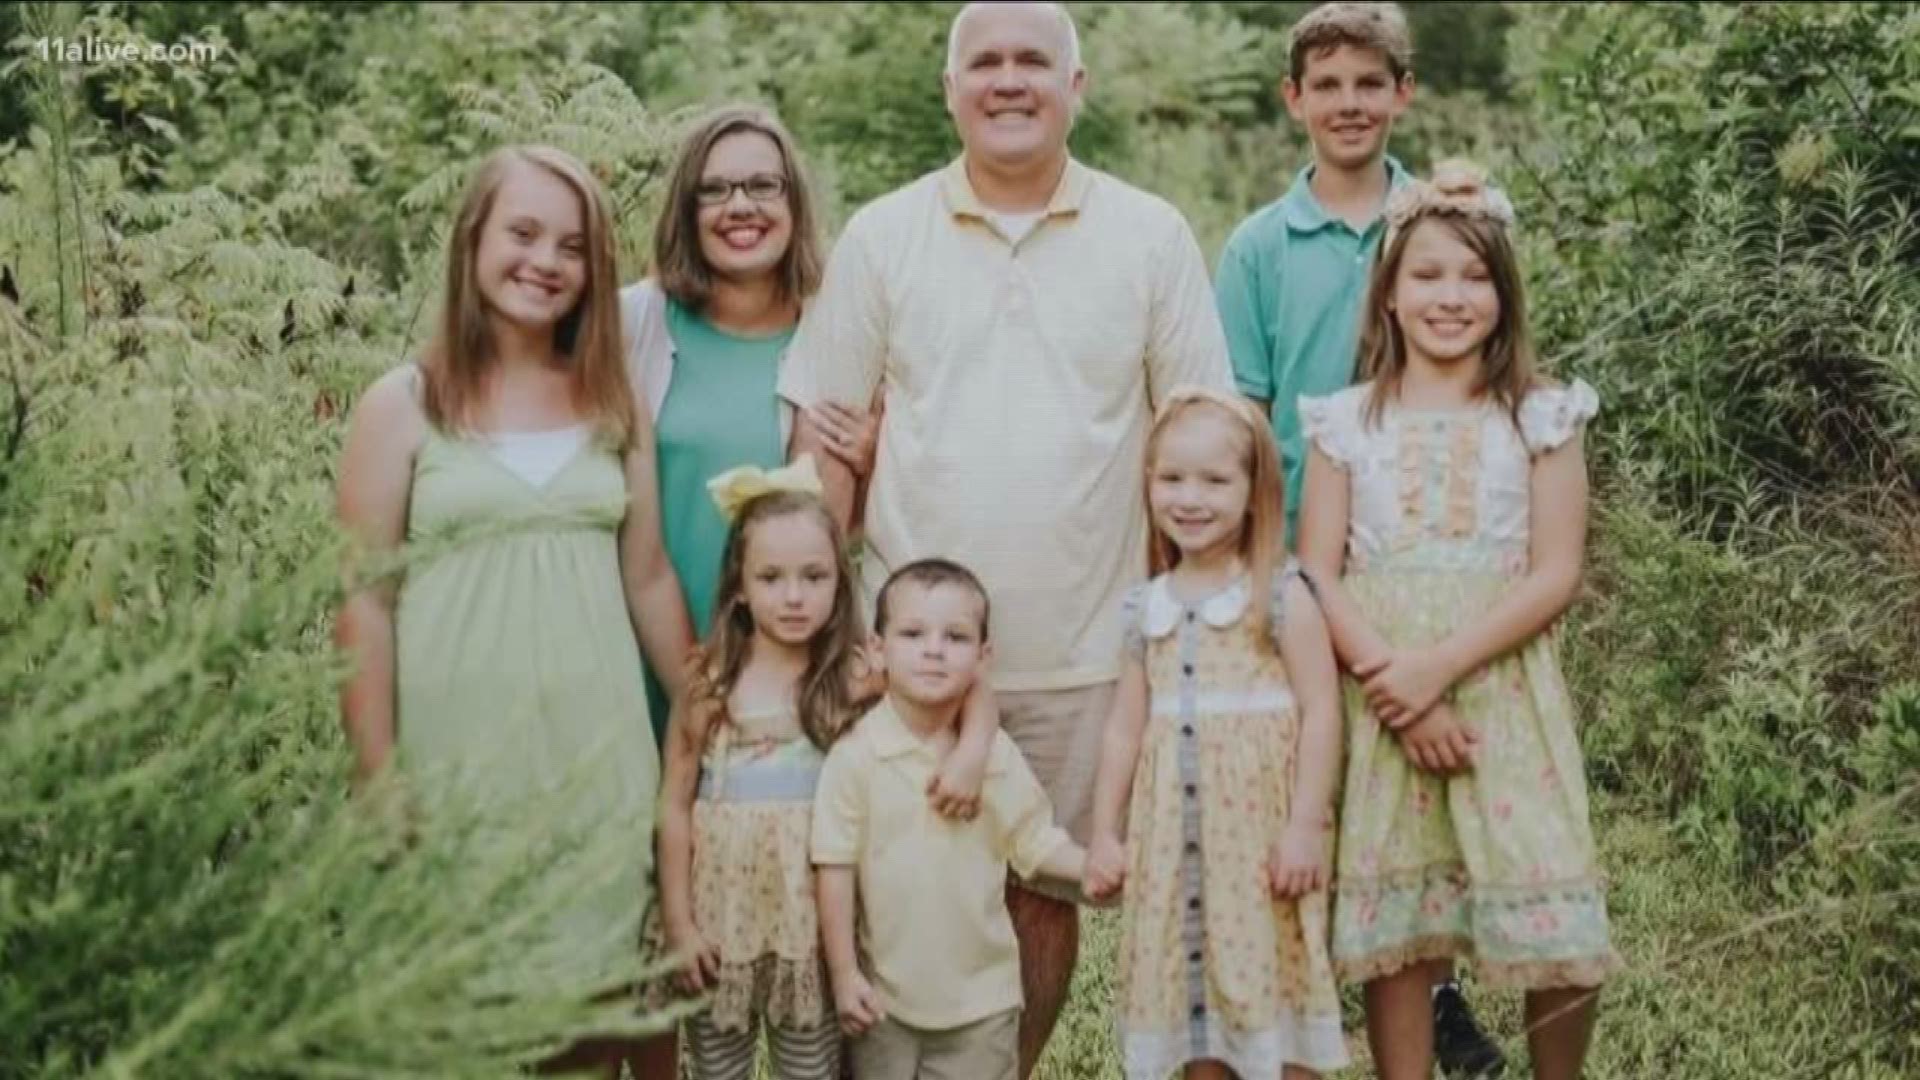 Whatever happened to the couple that adopted five children. Here's the story of their happily ever after.